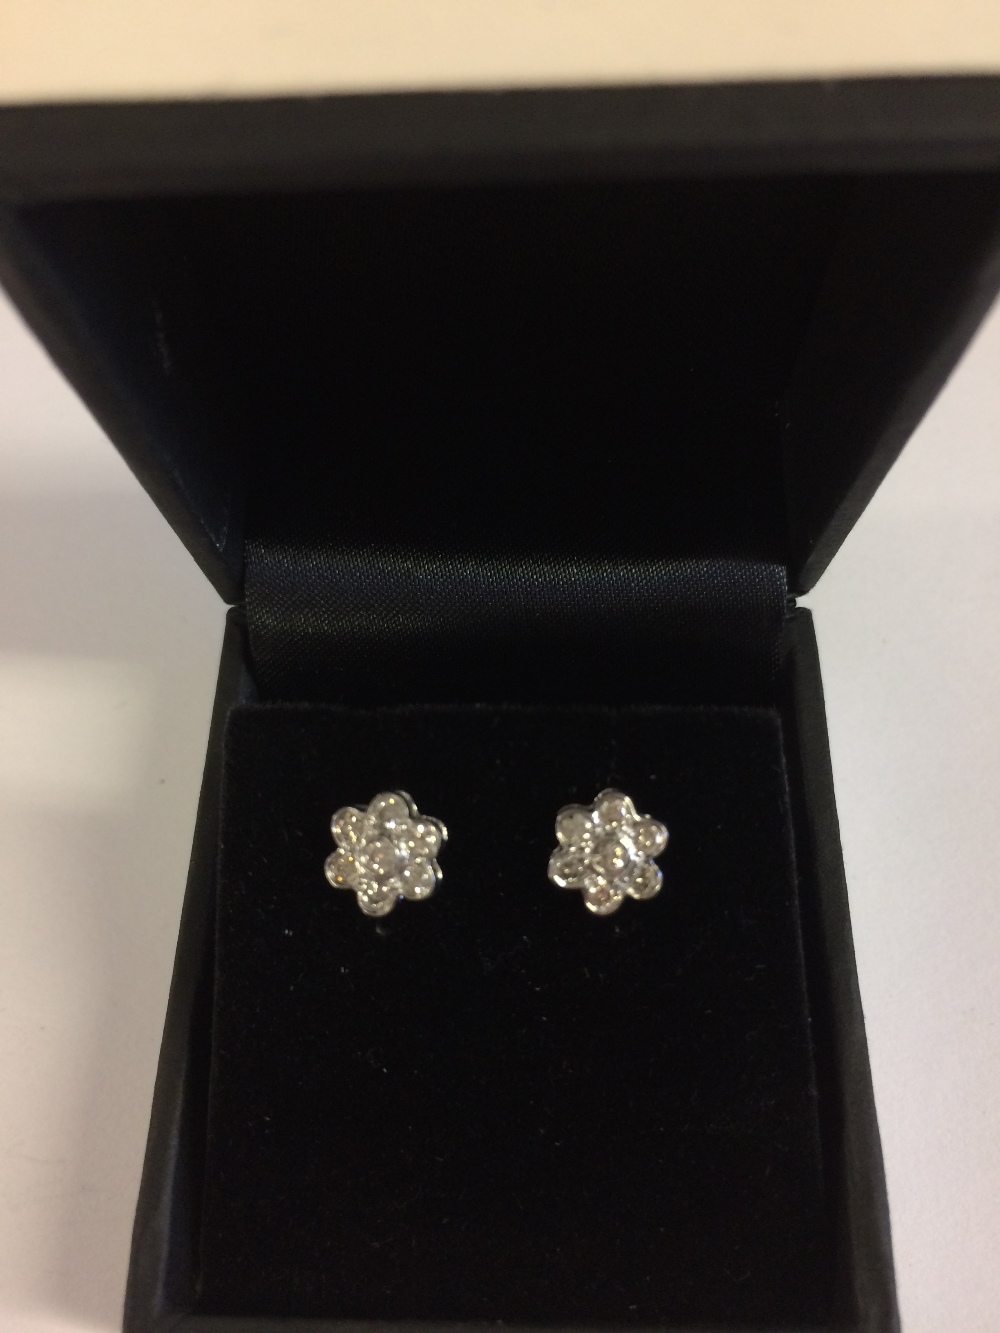 Pair of 18 carat white gold and diamond, daisy style, stud earrings